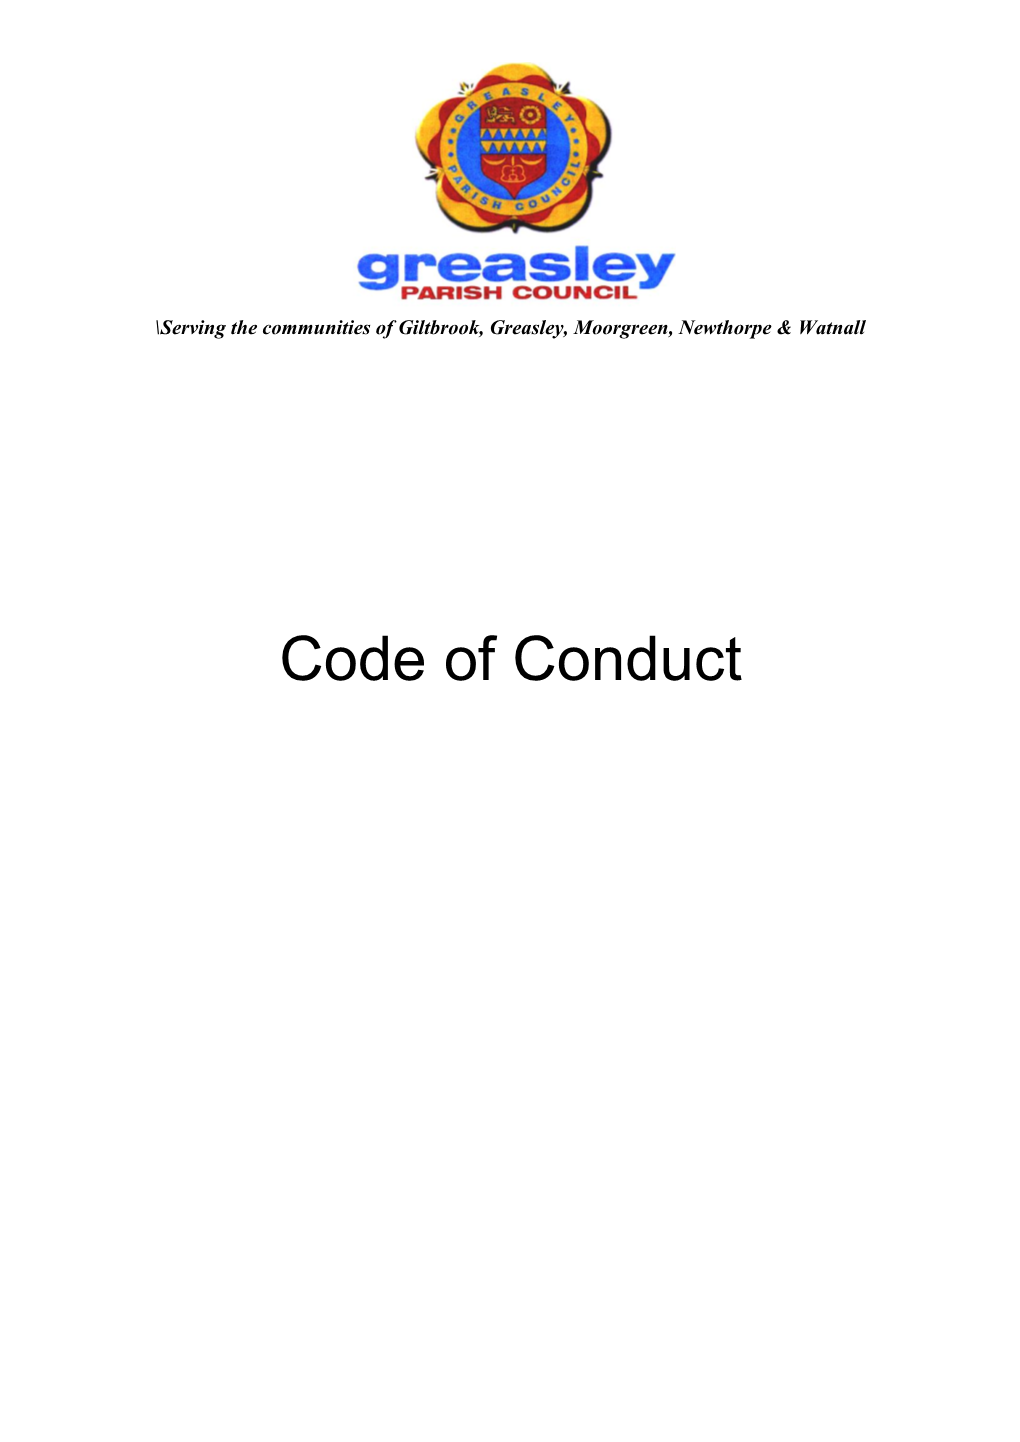 Code of Conduct of Broxtowe Borough Council